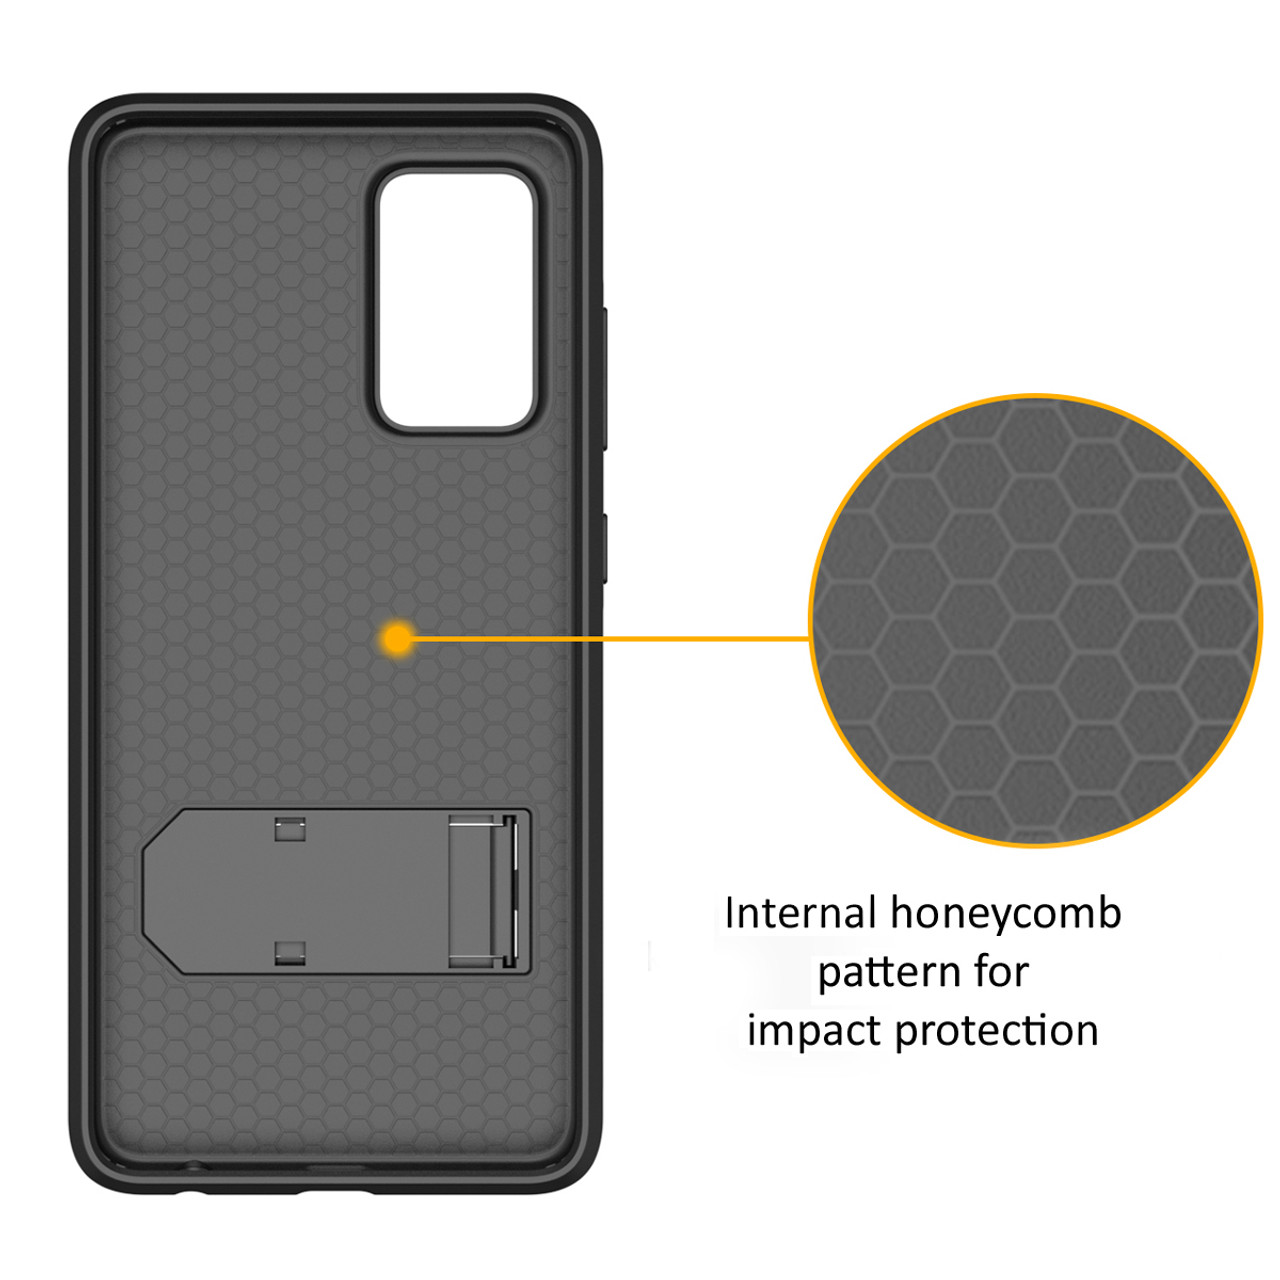 Galaxy A52 Case 5G / LTE Rugged Protective